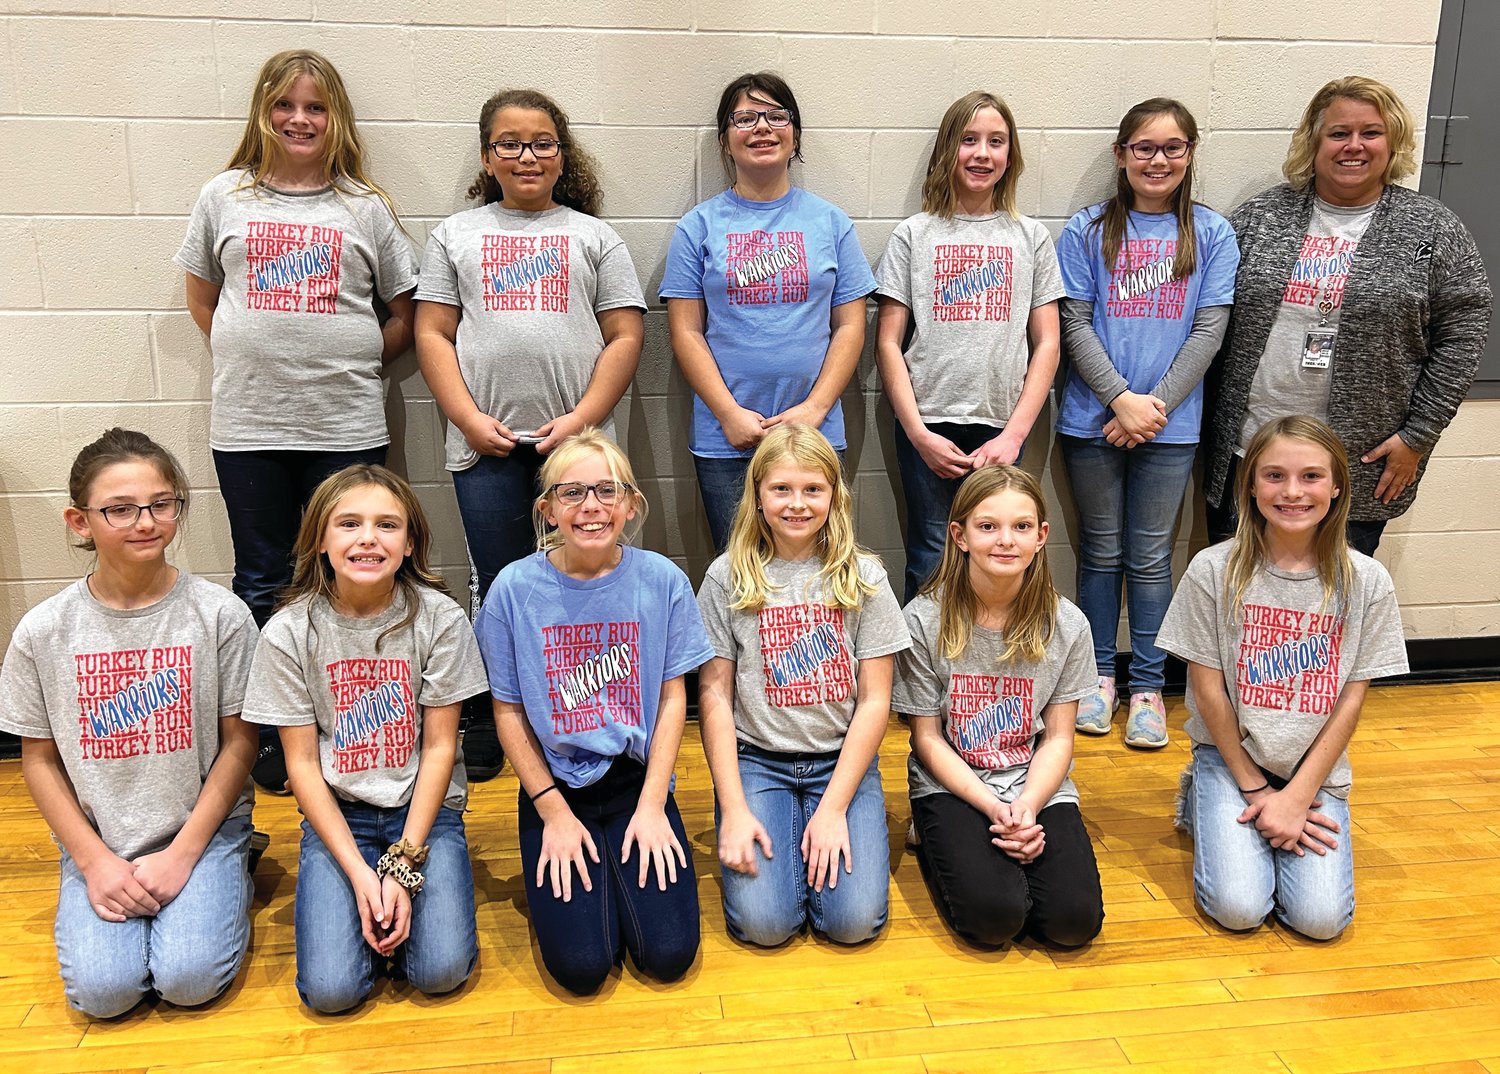 The Turkey Run Elementary Spell Bowl team participated in the area competition Nov. 14 at Central Elementary in Greencastle. The team competed in the Red Class with other schools across the state. Students practiced after school to study 750 words to prepare for the competition. During the contest, eight students each spelled seven words each. Team members are, from left, front row, Abby Mauntel, Kyndal Gordon, Madi Schaefer, Piper Green, Zoey Blystone and Ellyrae Rader; and back row, Morrissa Brown, Nove DeBord, Alyssa Harshman, Allie Sauter, Emelia Chapman and Coach Erica Crane.